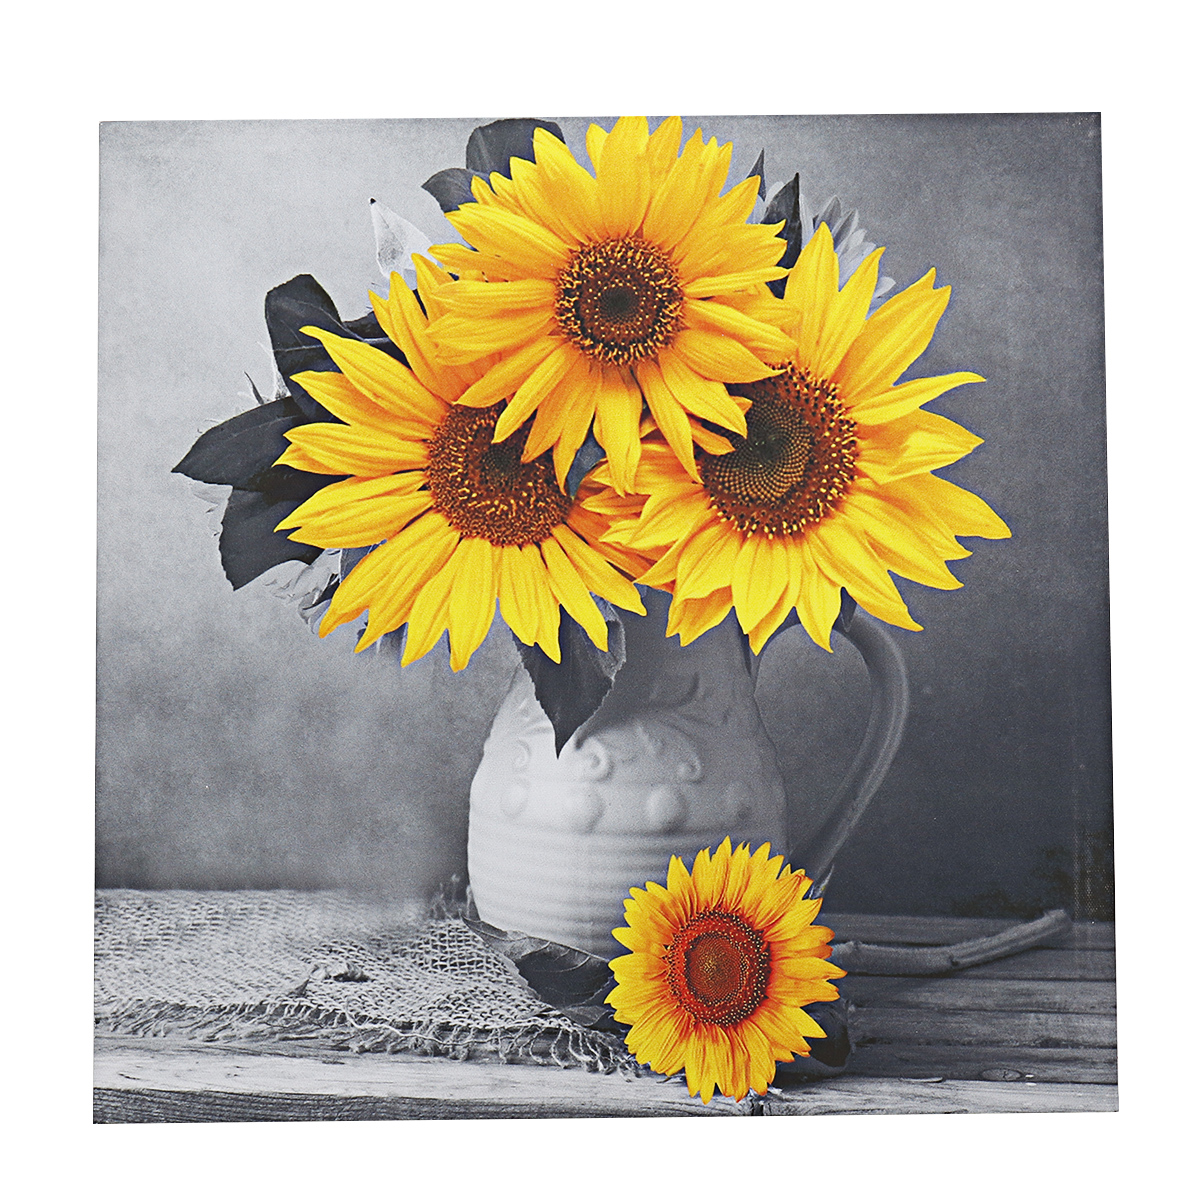 30303-cm-Sunflower-Wall-Art-Painting-Living-Room-Bedroom-Hanging-Canvas-Pictures-Office-Mural-Decora-1791798-12